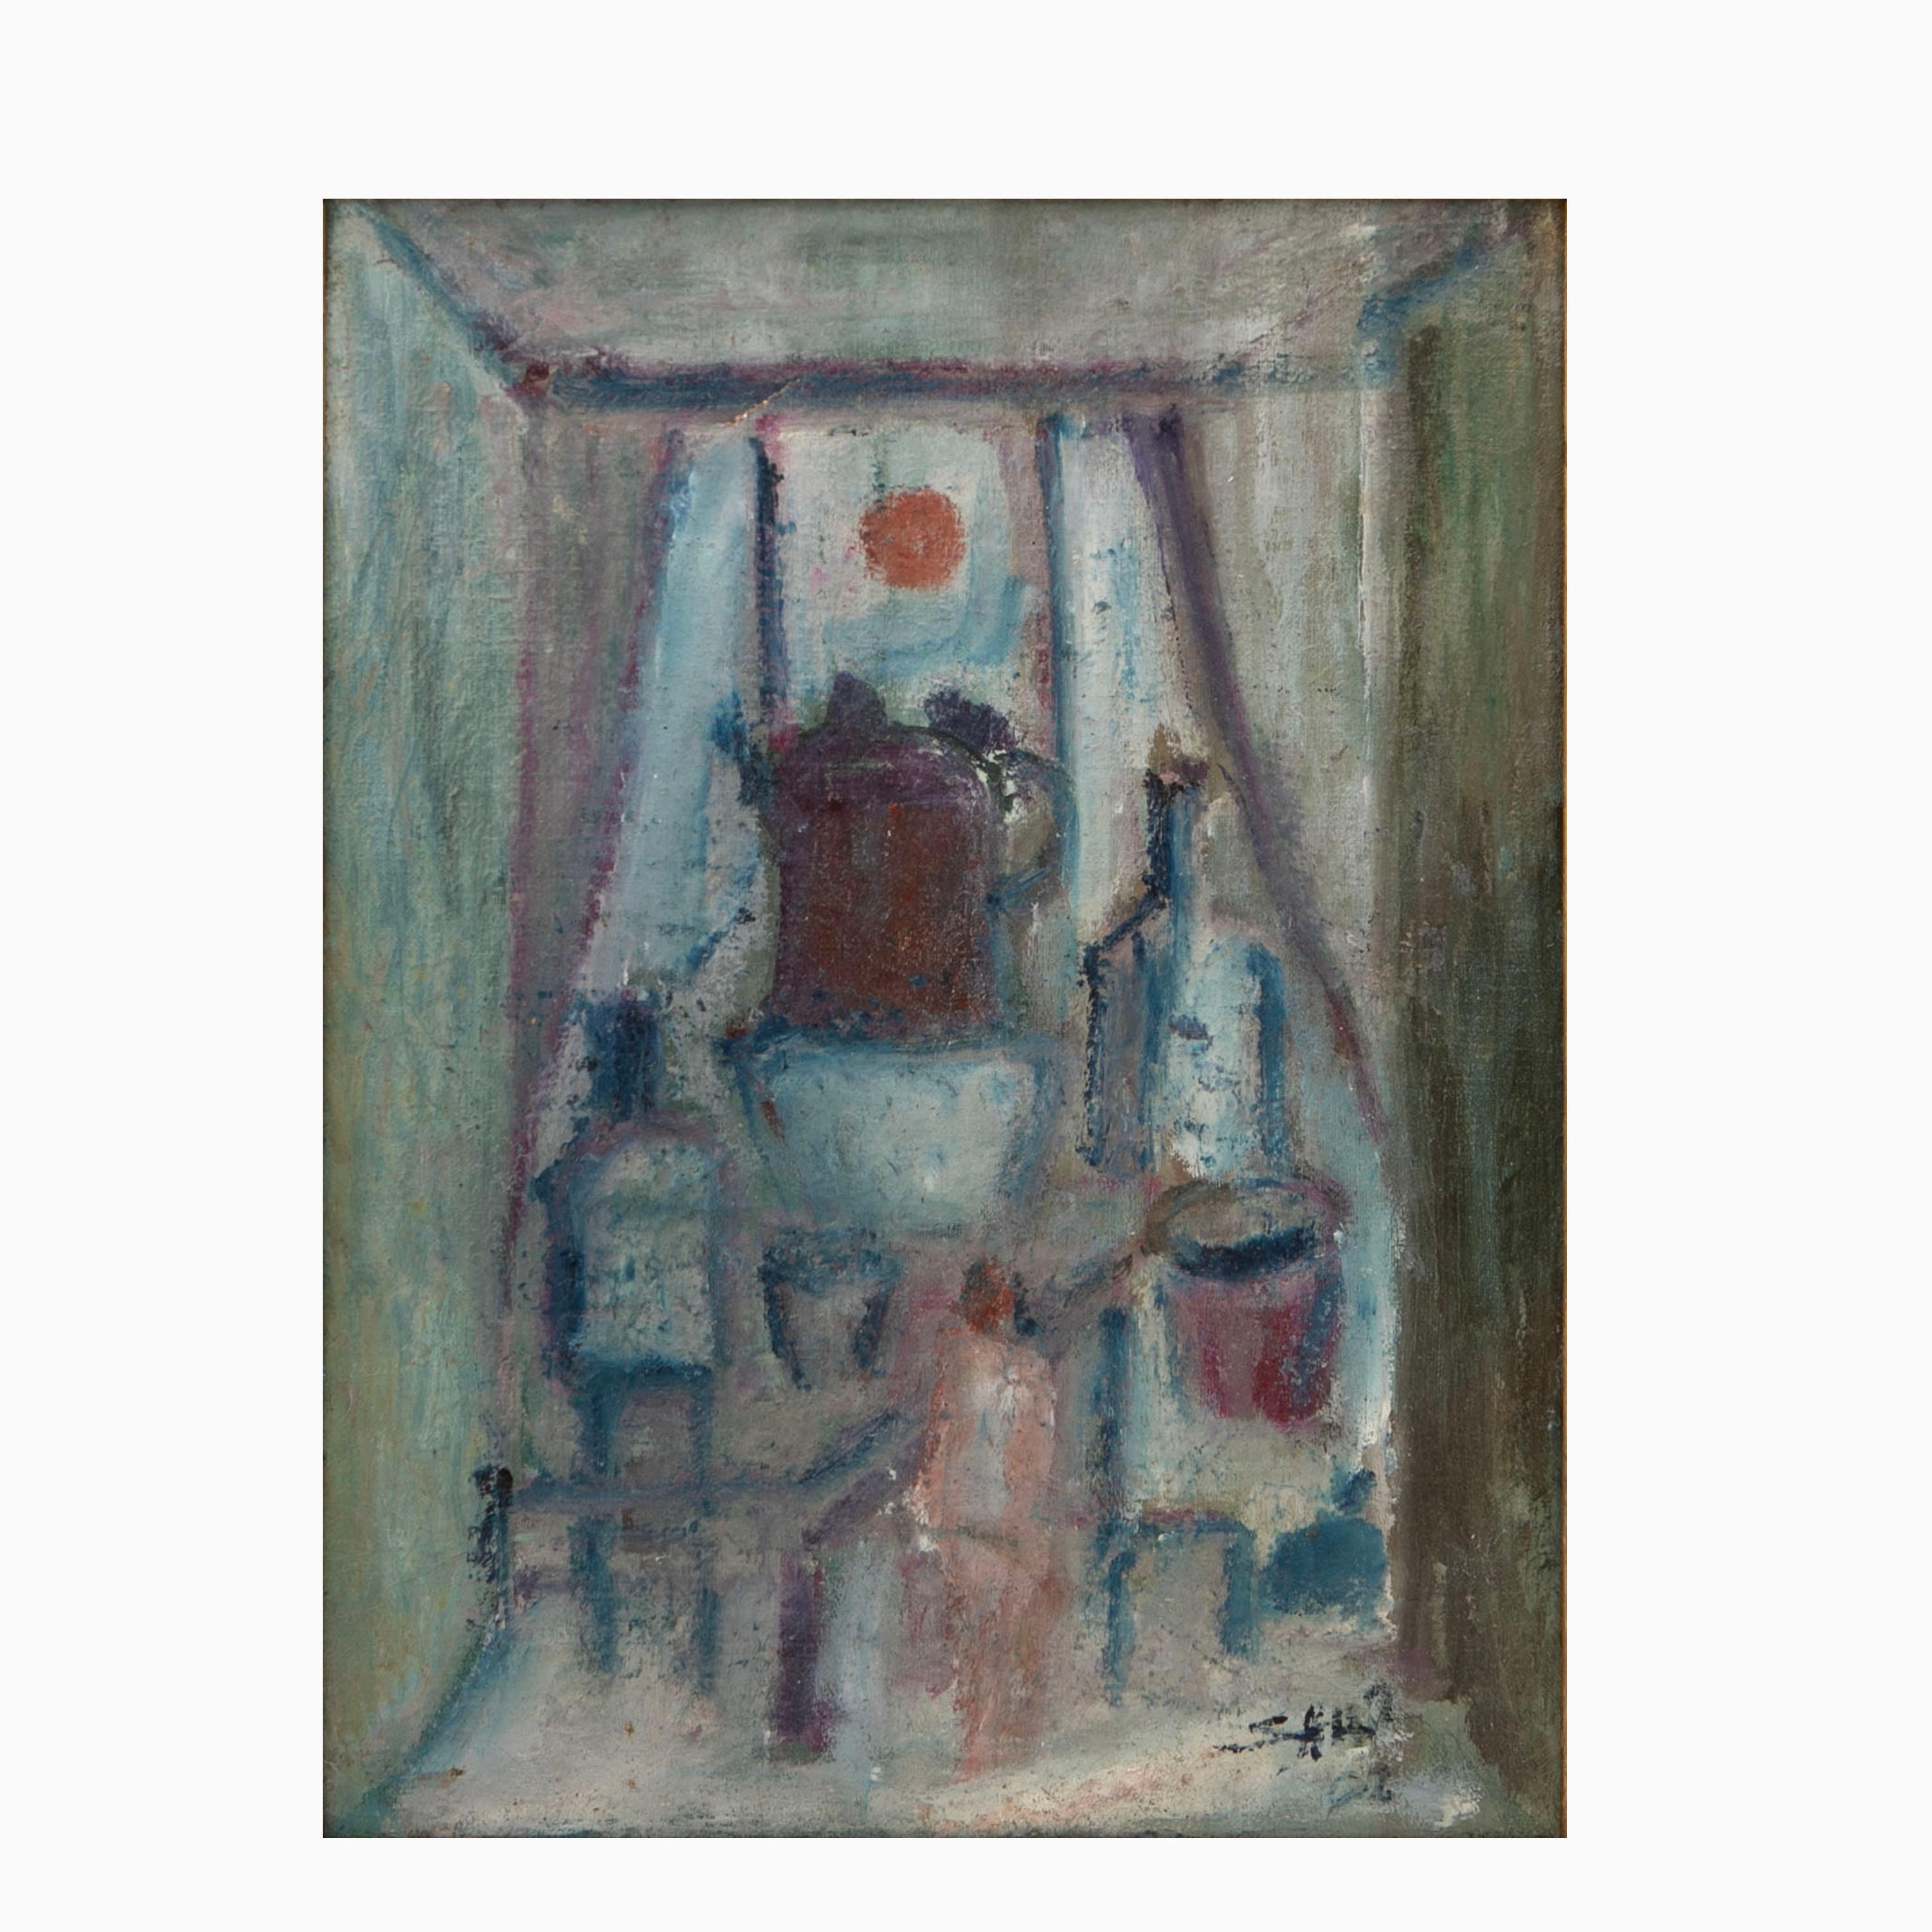 Ali Afshar, b. 1947 (Teheran, Iran).
Painting: Still Life, oil on canvas. Signed. Framed in a gilt wooden frame that complements the painting well.
Frame dimensions: H: 61 x 49 x 3  Canvas dimensions: 47 x 35.

The painting was exhibited in